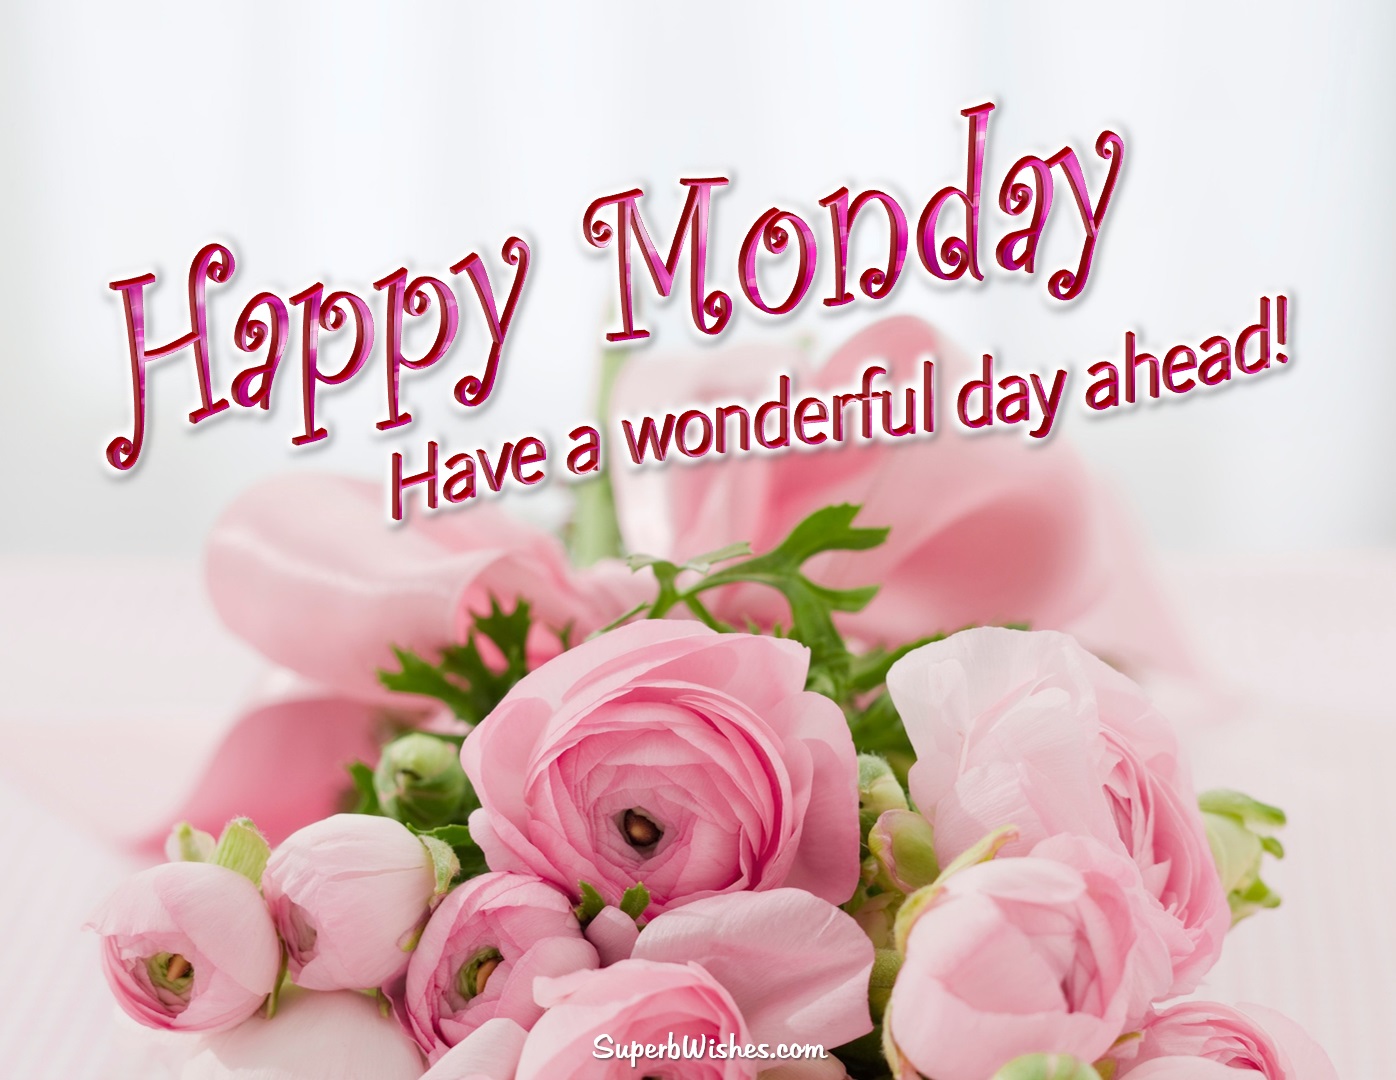 Happy Monday Images - Have A Wonderful Day Ahead! | SuperbWishes